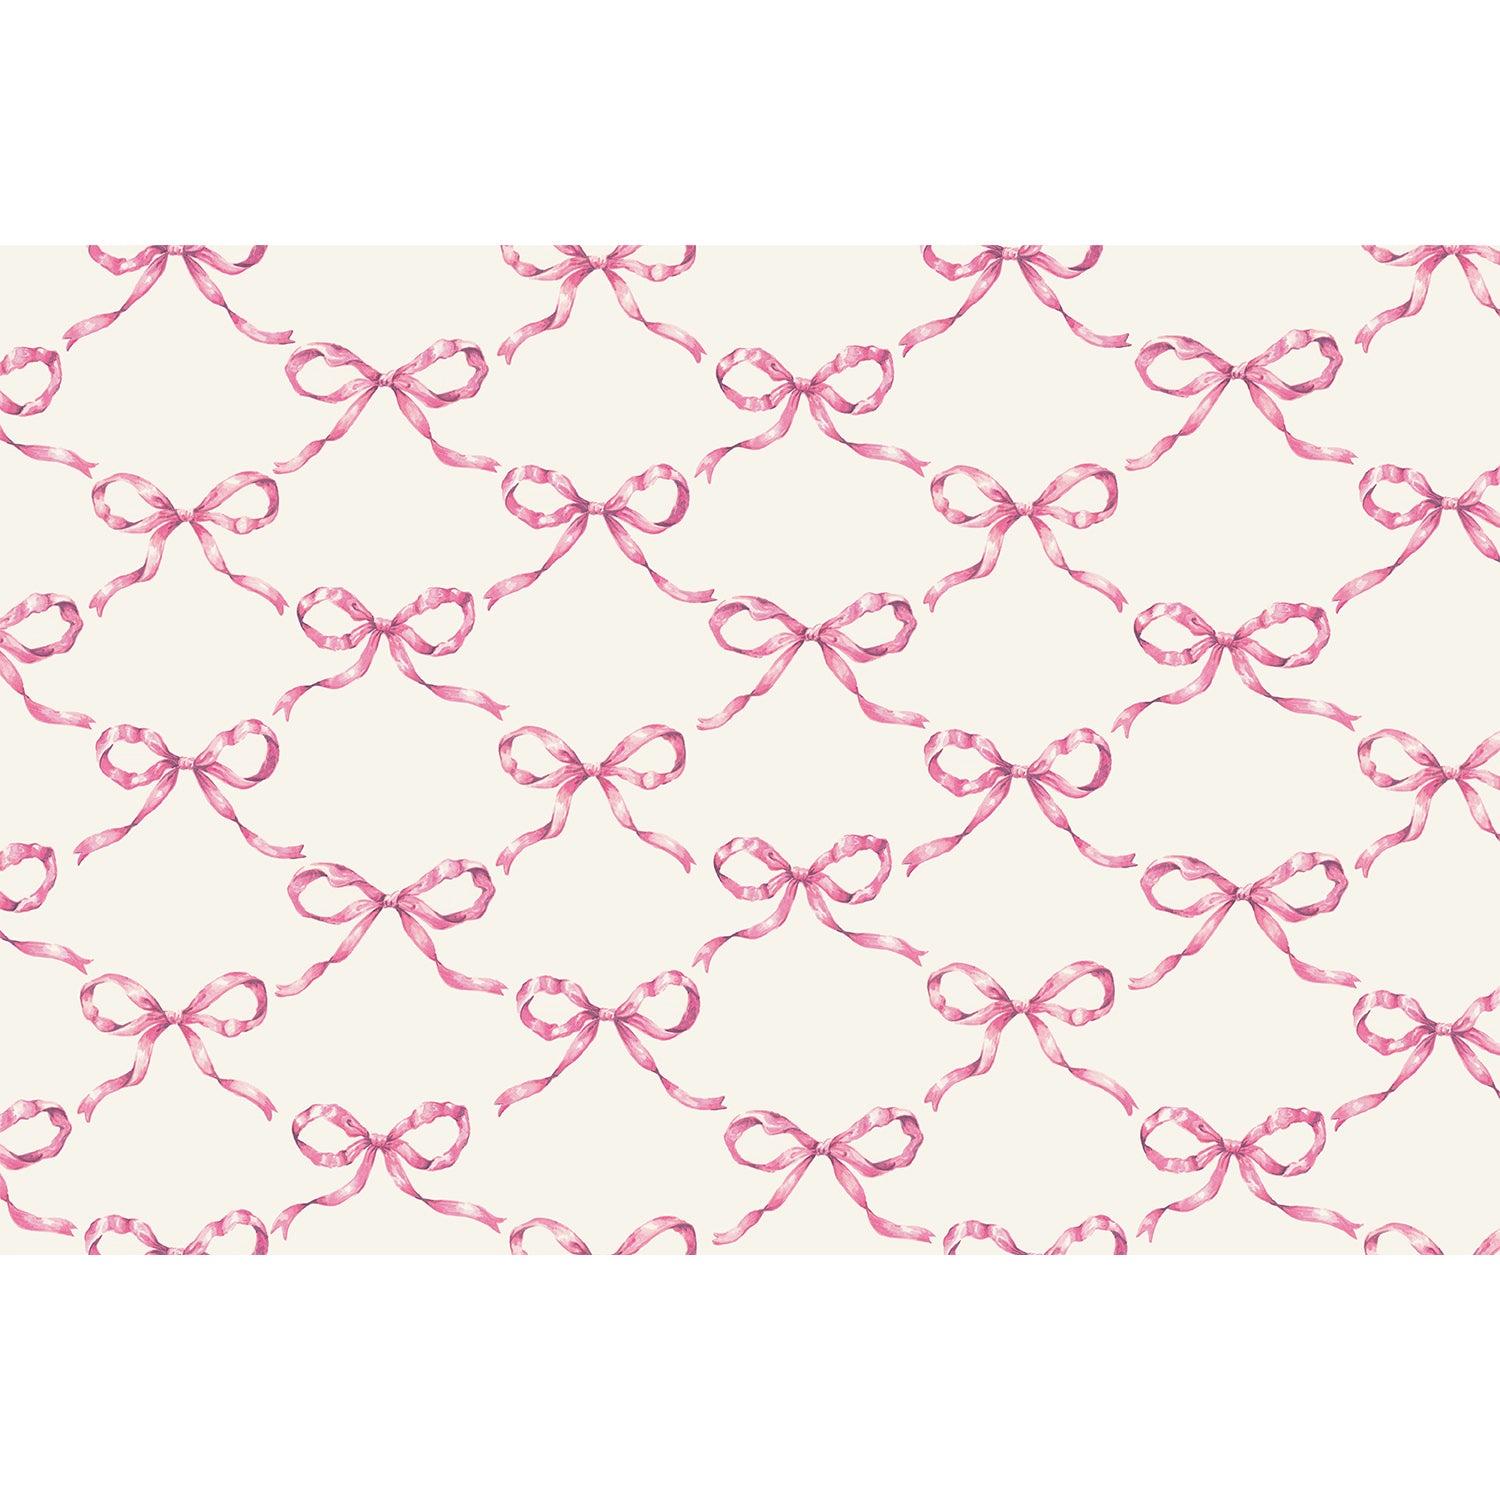 An illustrated lattice pattern made of elegant light pink bows evenly spaced over a white background.